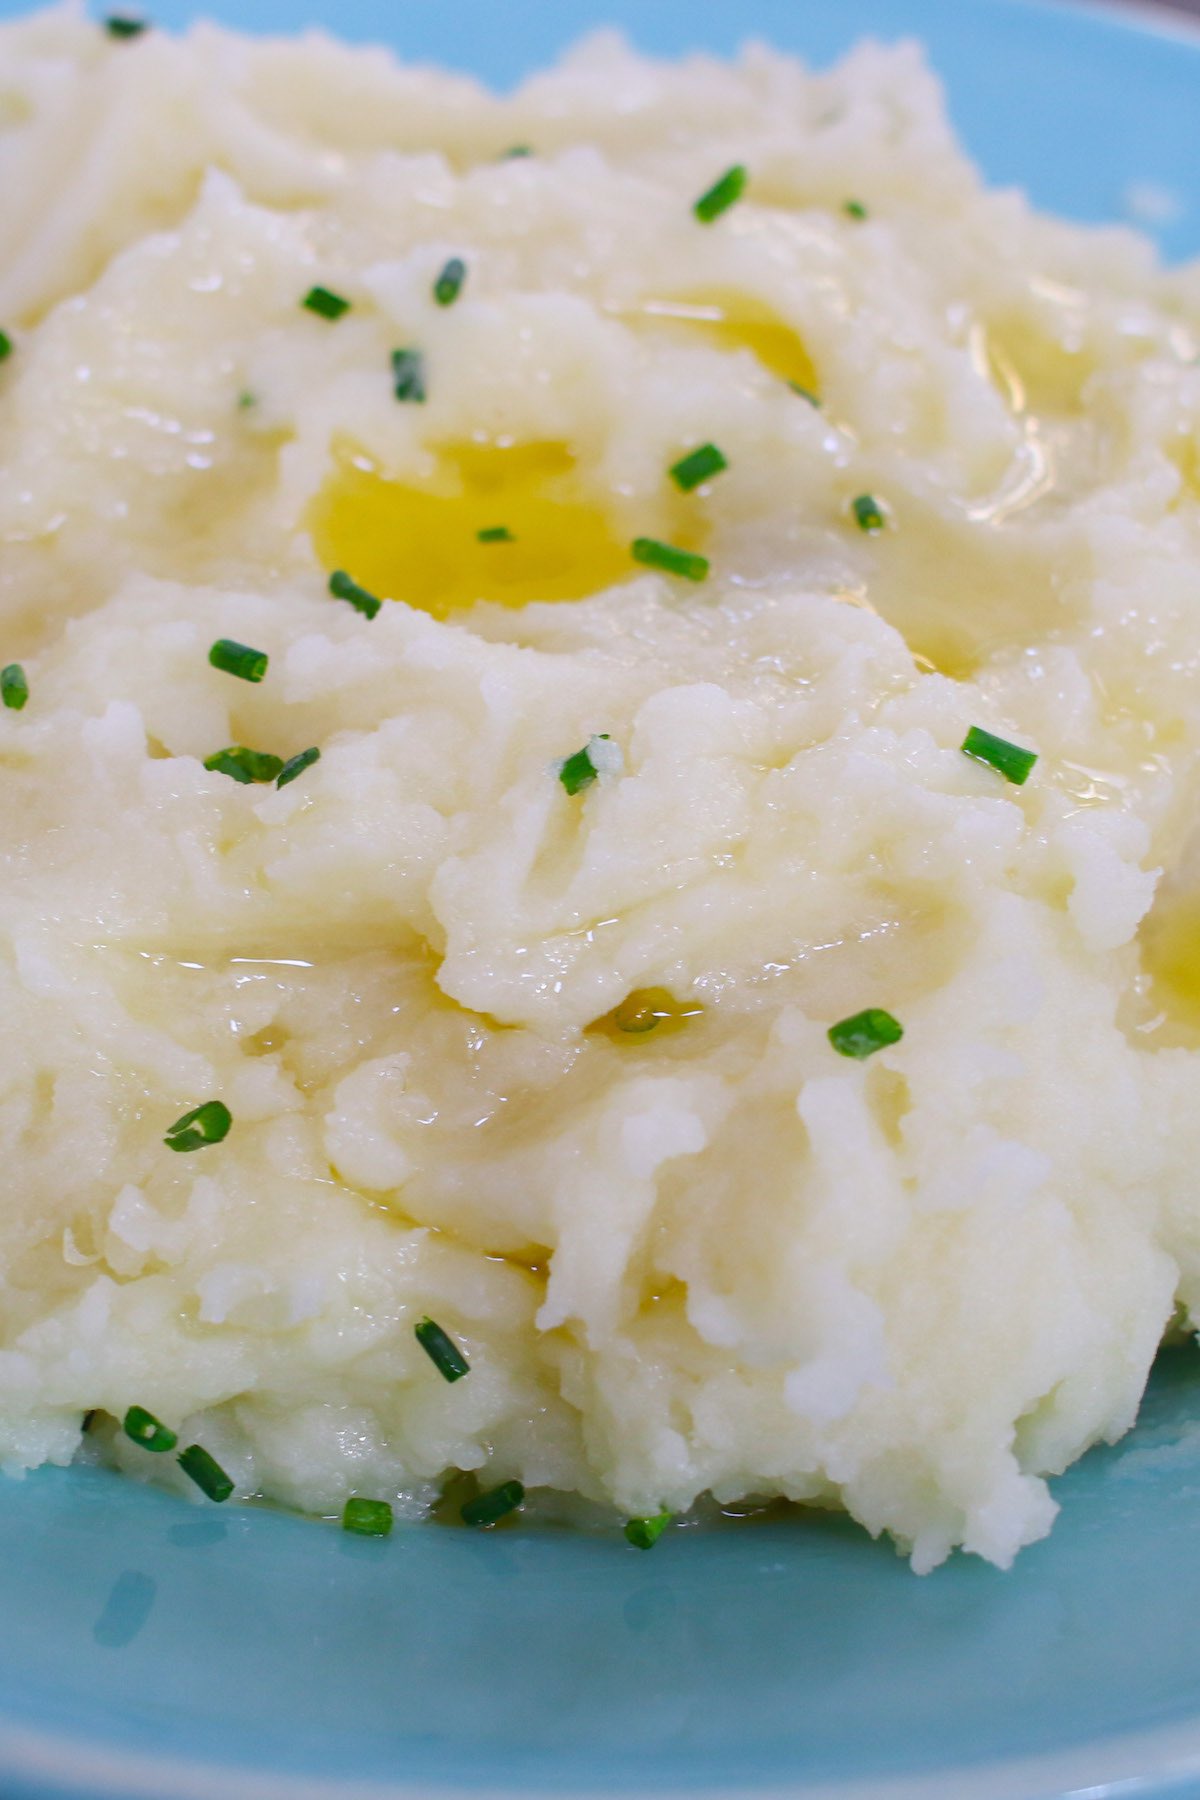 Microwave mashed potatoes garnished with chives and melted butter on a serving plate